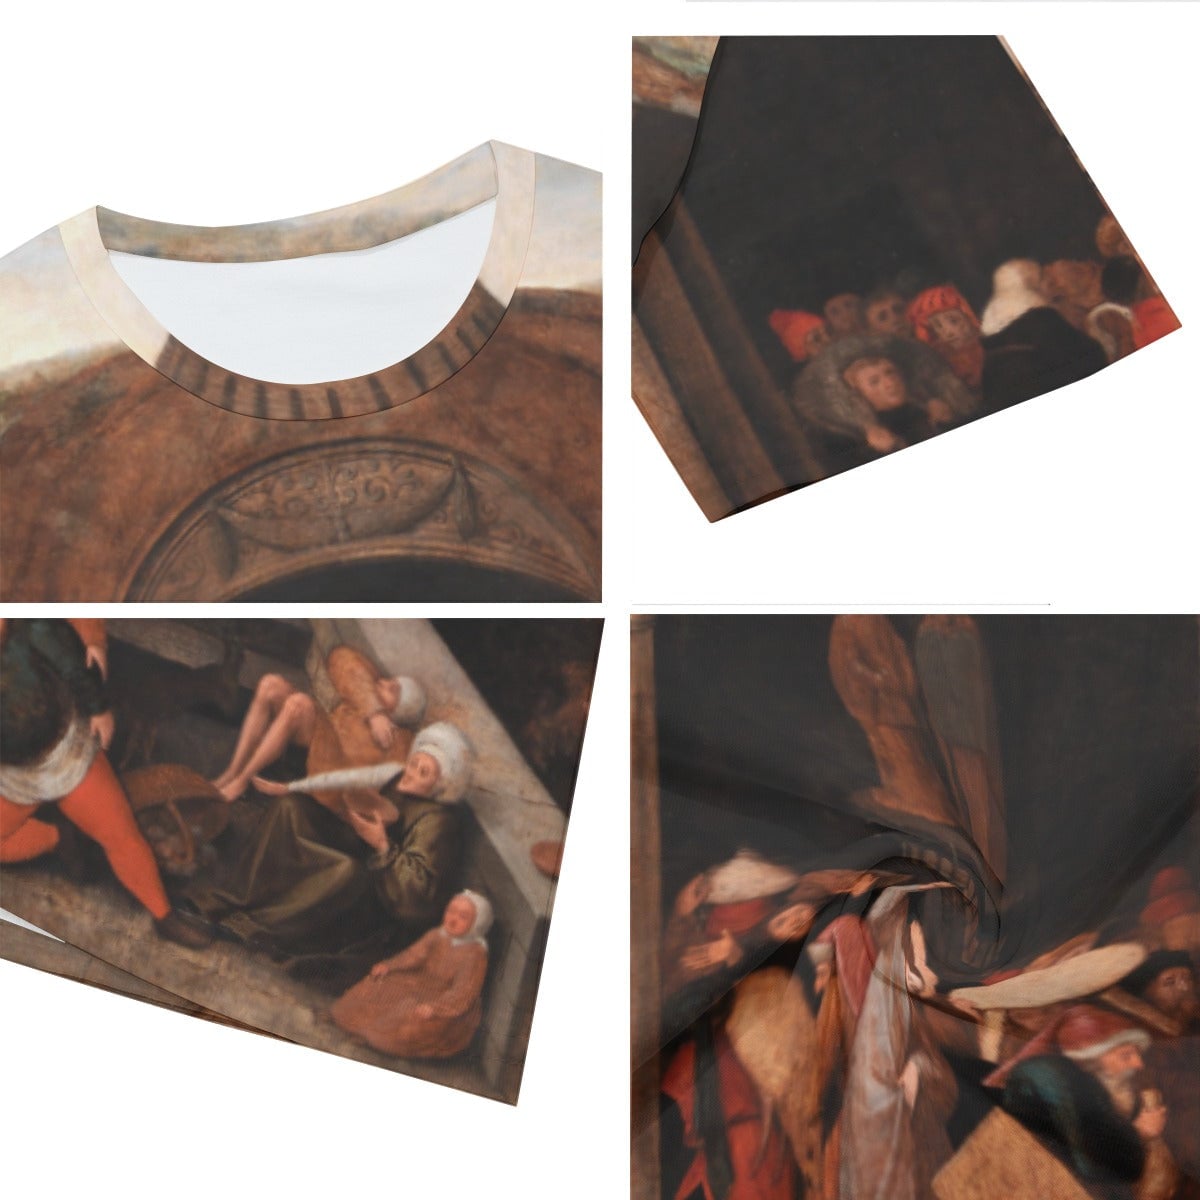 Christ expels the Peddlers by Hieronymus Bosch T-Shirt